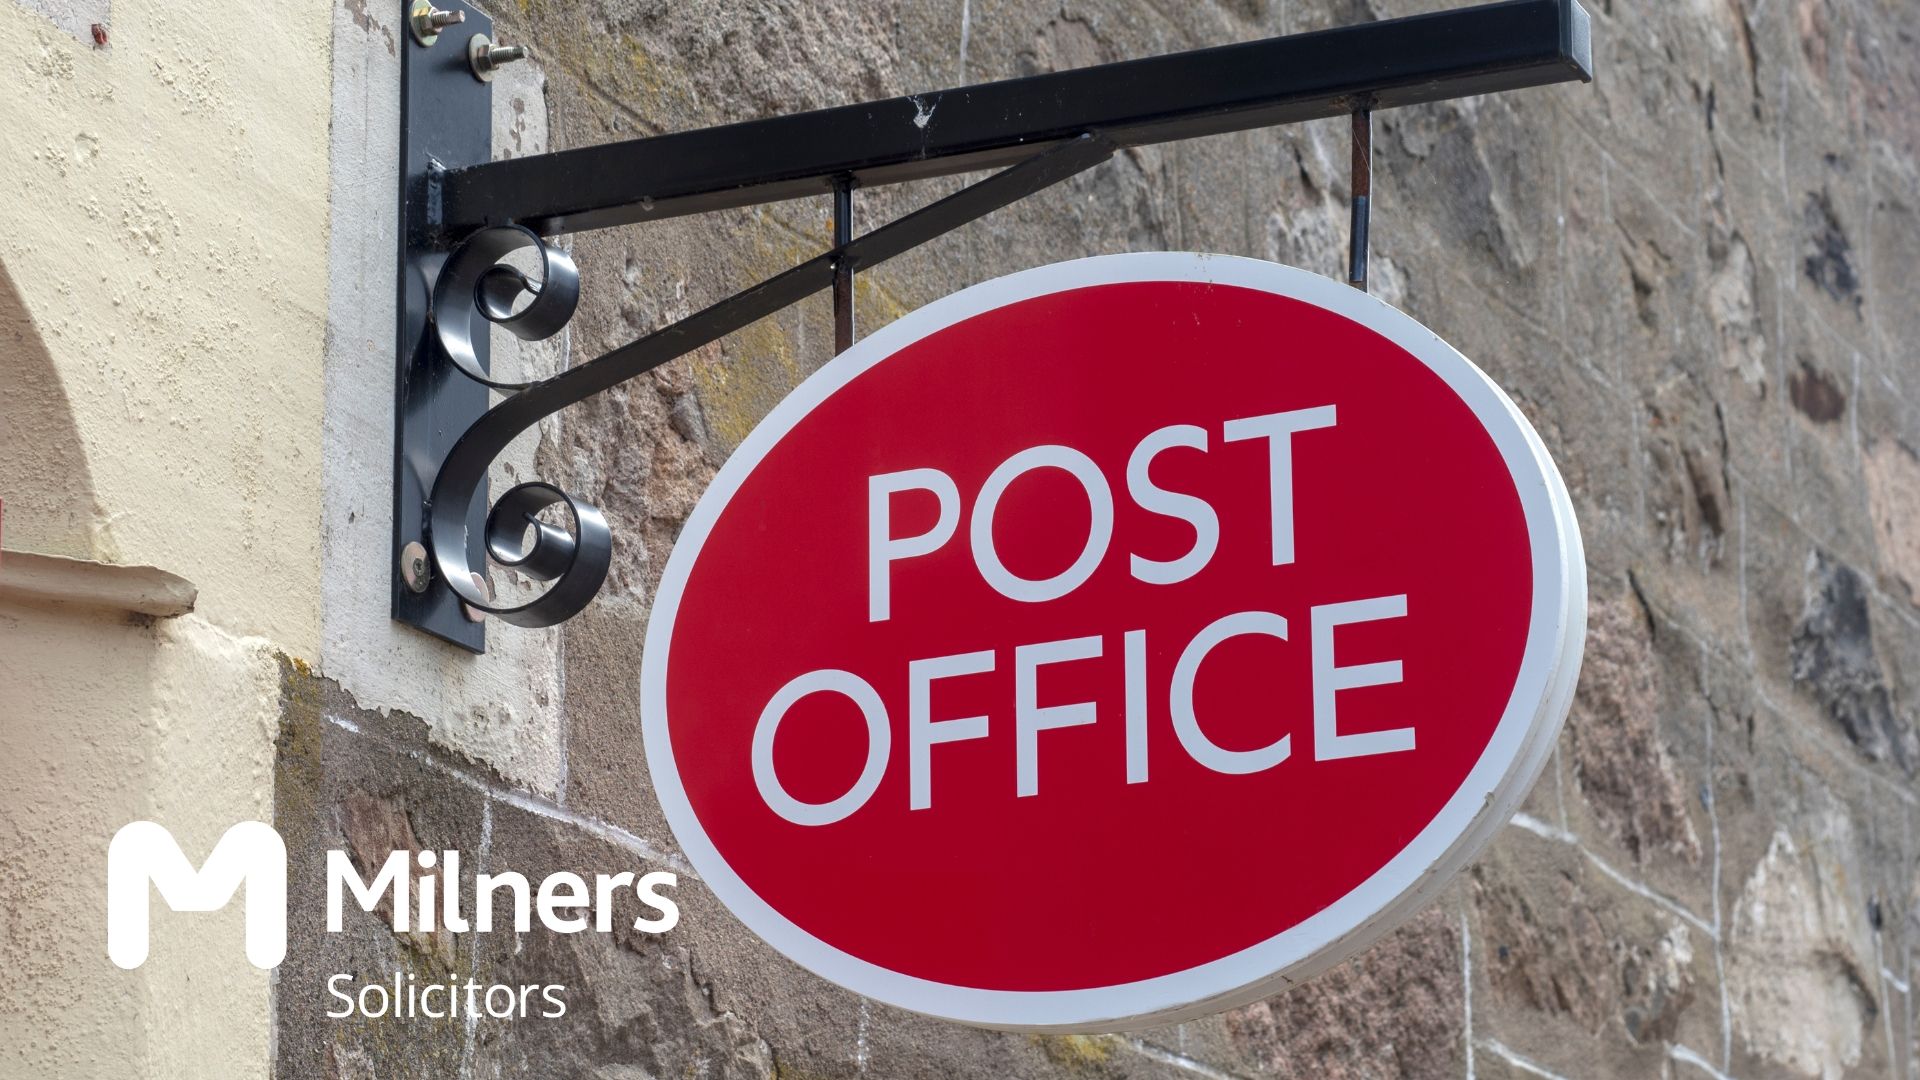 It's been called the biggest miscarriage of justice in UK history. Learn about the Post Office Horizon IT inquiry.
